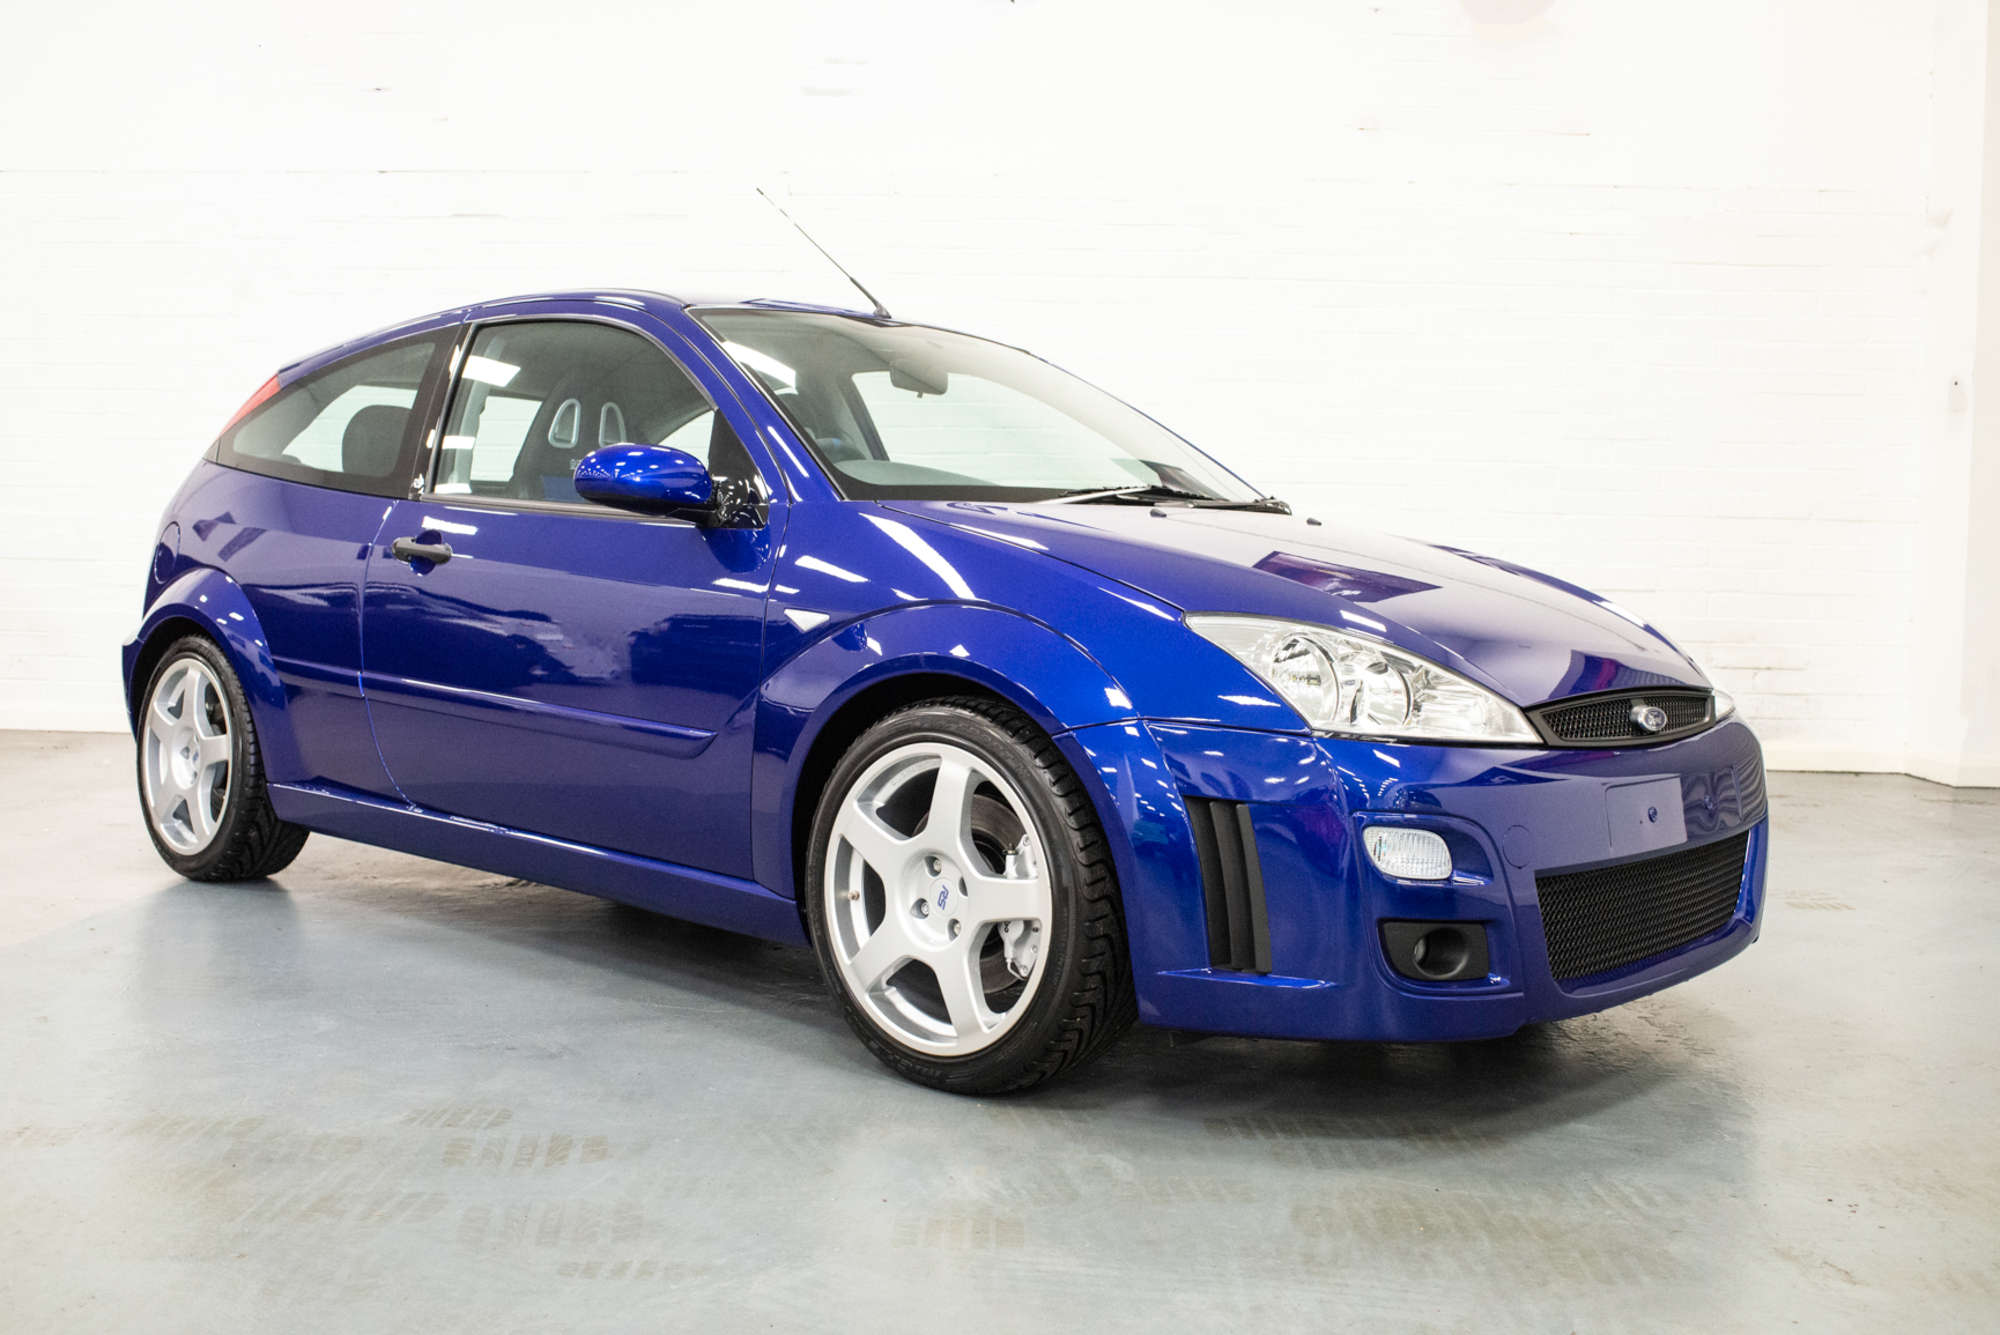 Update: 21-mile Ford Focus RS Mk1 sells for £75,000